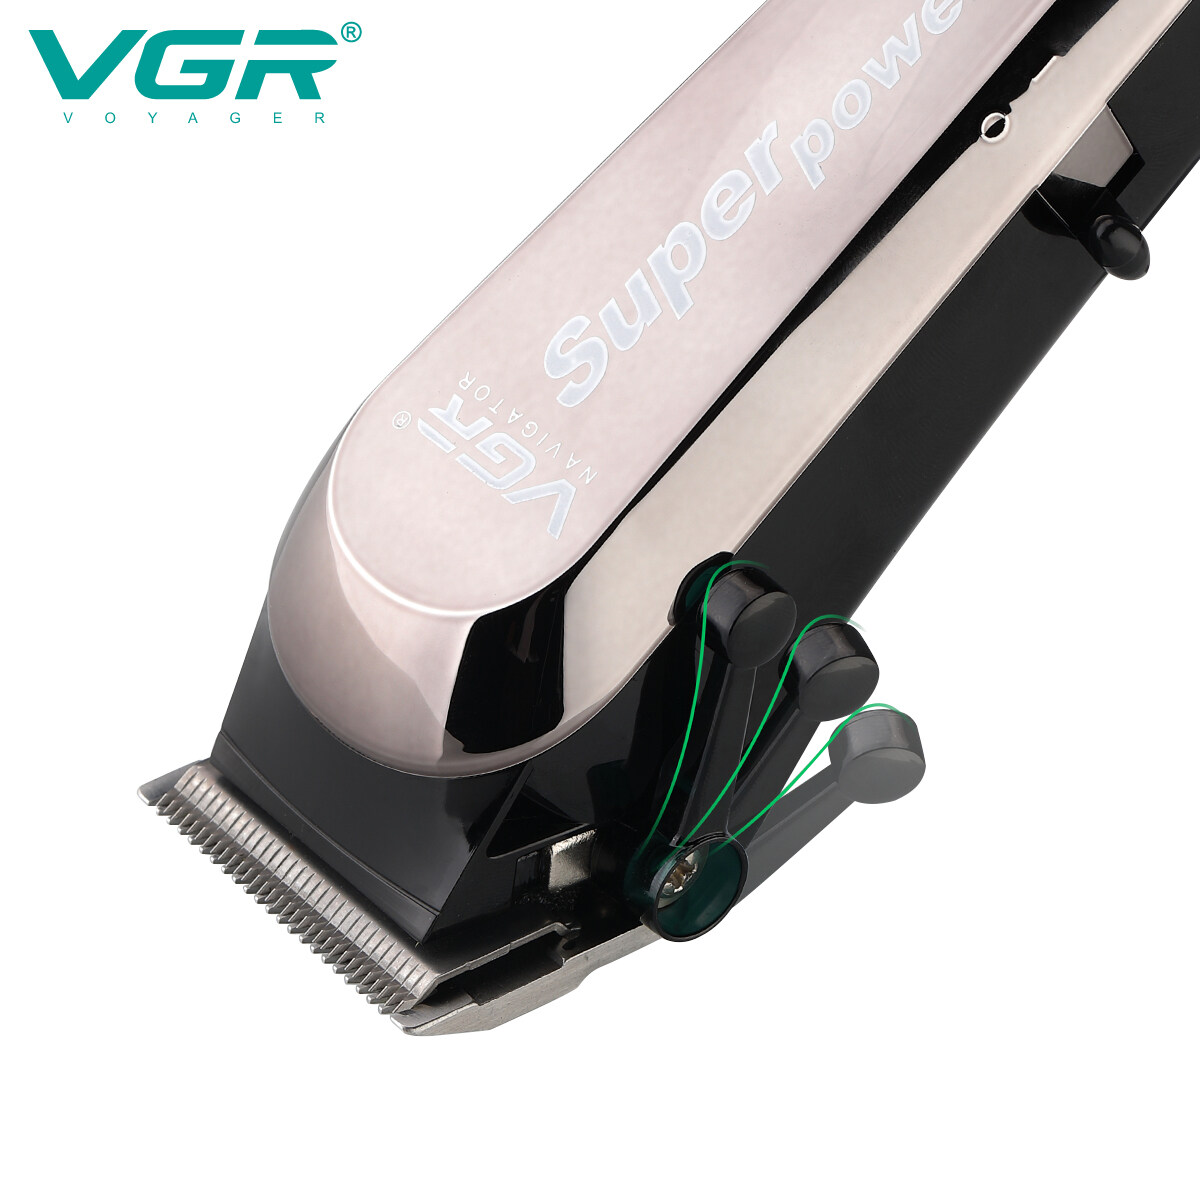 Usb Charger Hair Clippers Factory, Usb Charger Hair Clippers Manufacturer, Wholesale Usb Charger Hair Clippers